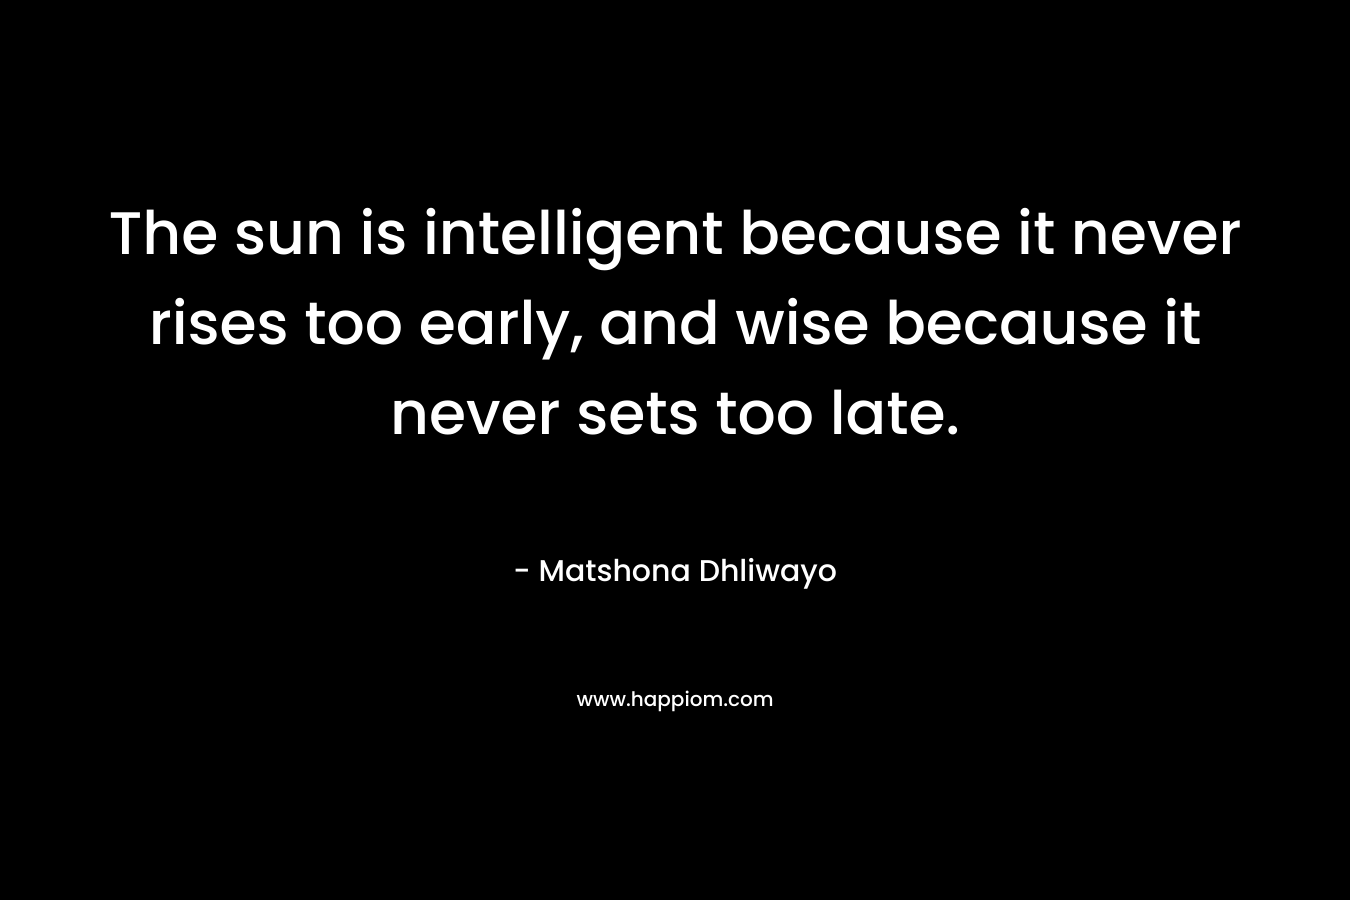 The sun is intelligent because it never rises too early, and wise because it never sets too late.